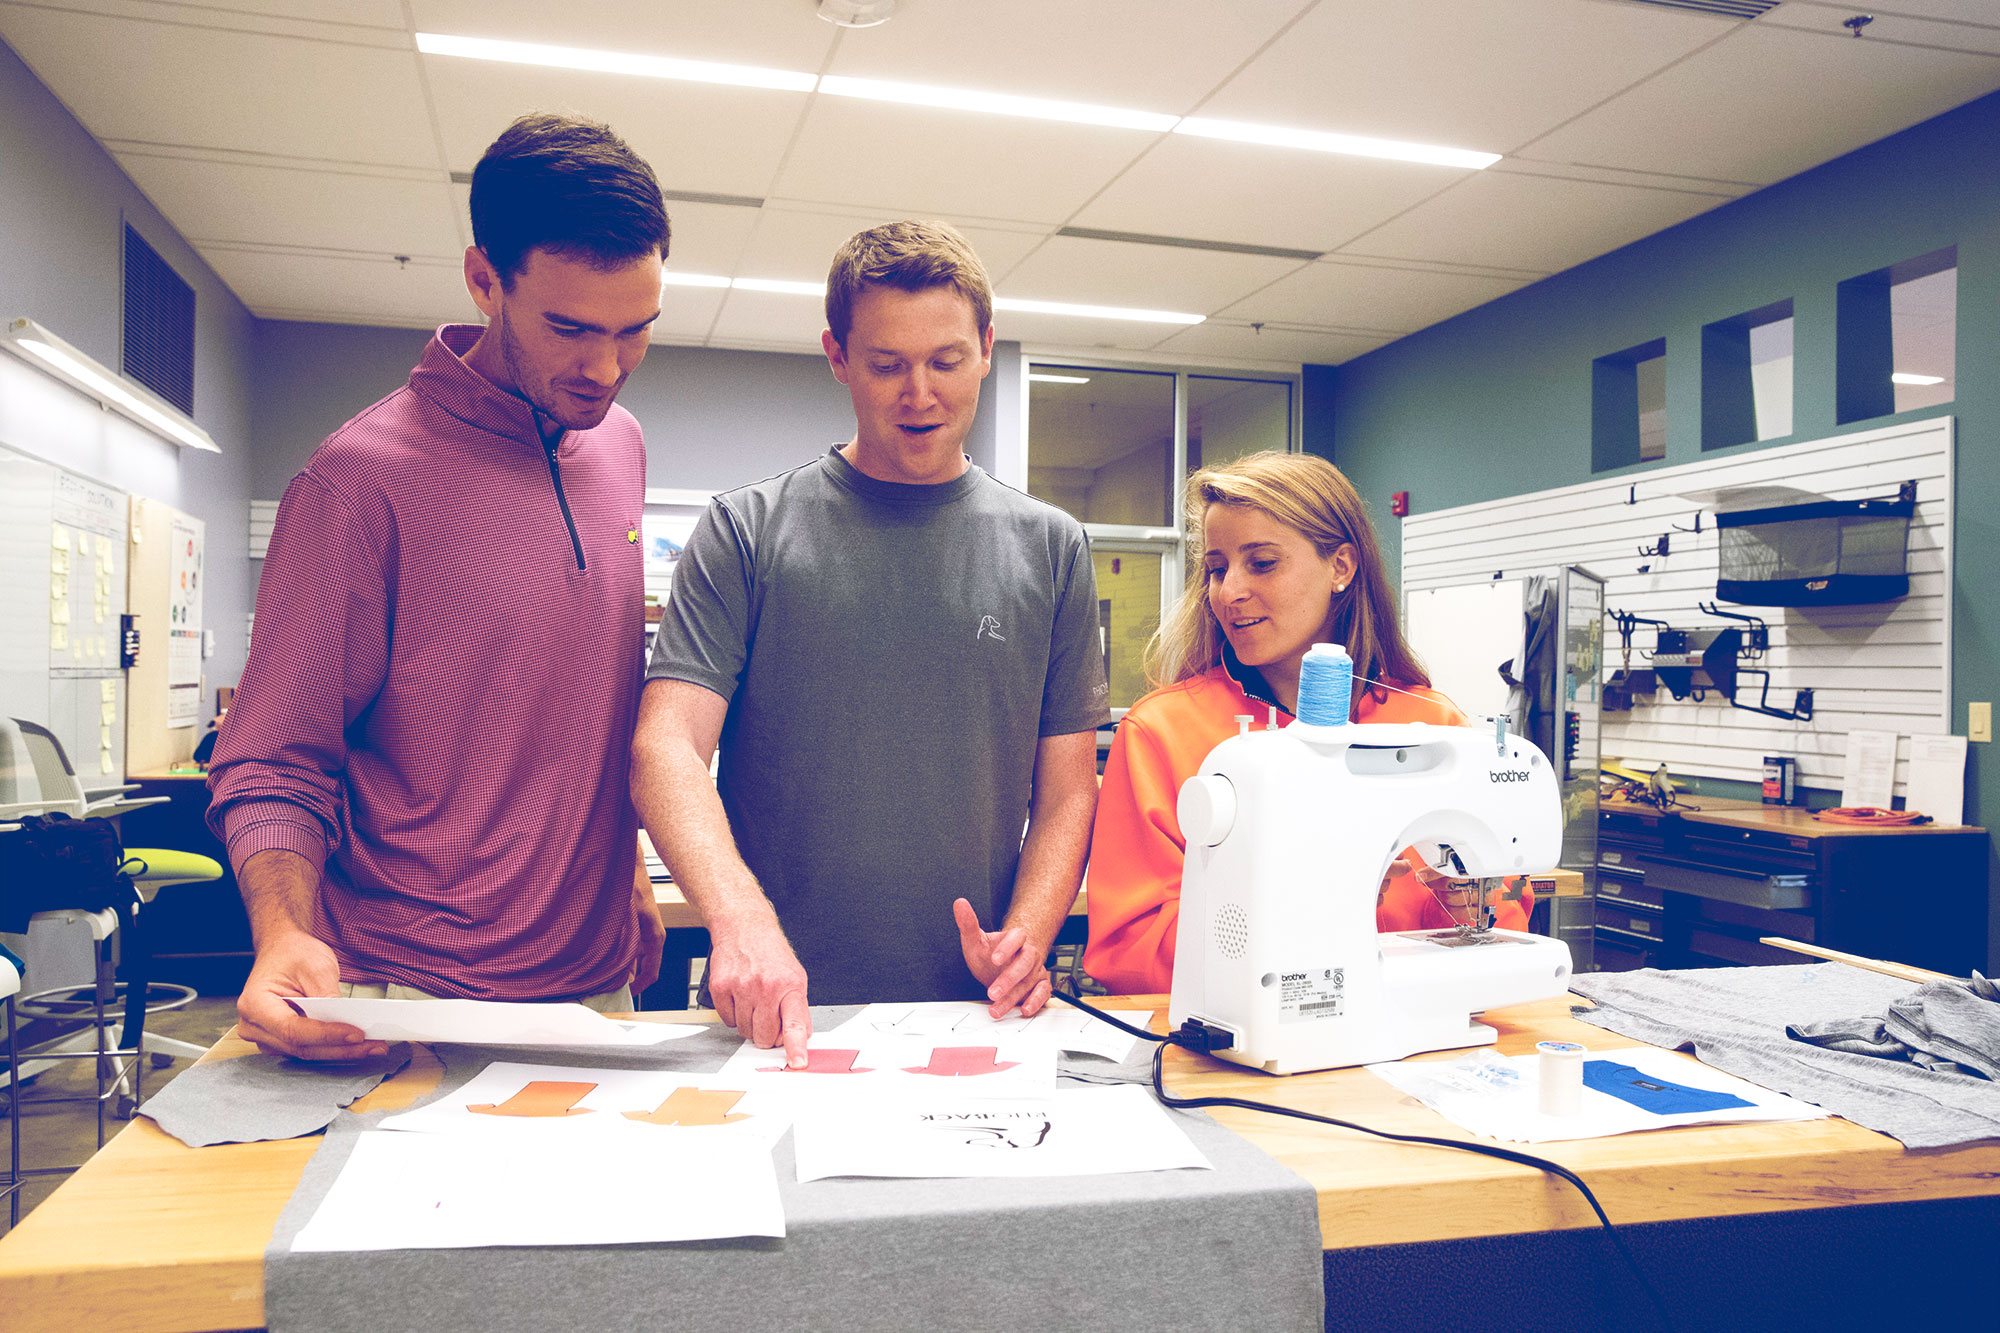 Matt Loftus, left, business partner Kevin Hubbard, middle, and Kristina Loftus, right, stand at a table looking at shirt designs